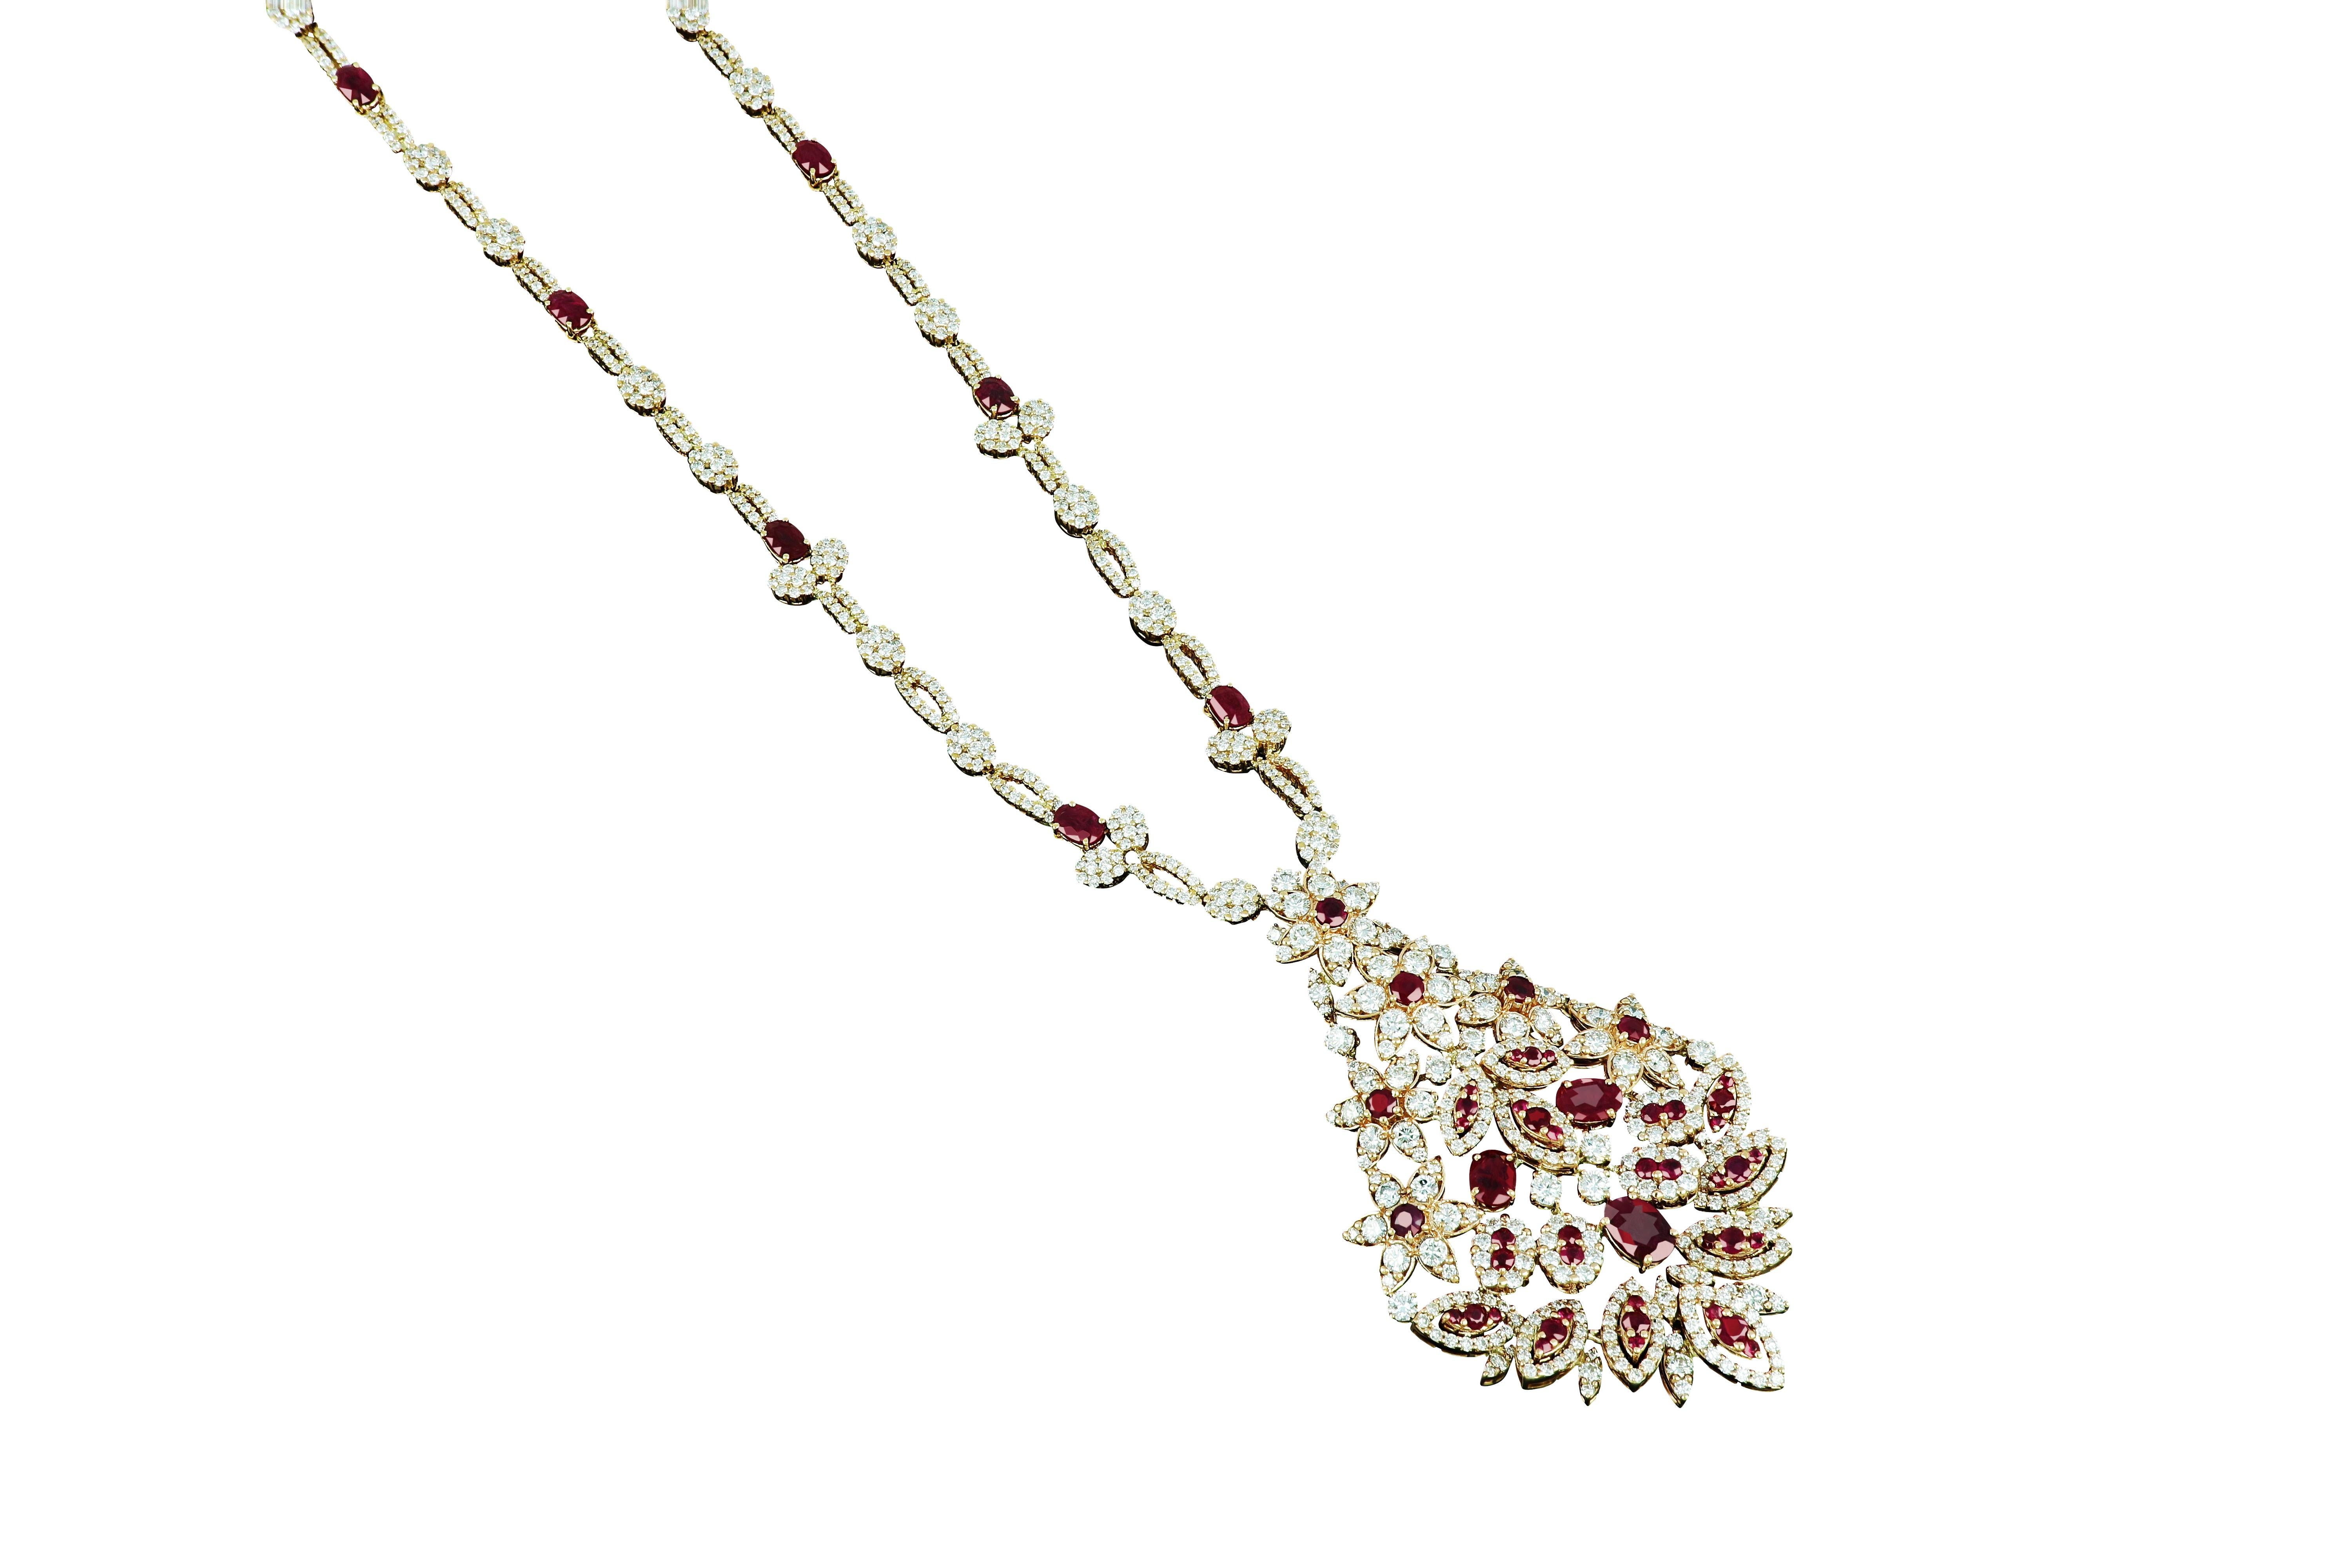 Unique, floral, chic 18K rose gold necklace by Amwaj Jewelry with round shape diamonds which are perfectly, delicately set with Ruby to make a perfect assemble for this necklace.  This finely detailed, geometrical and charming necklace adds a